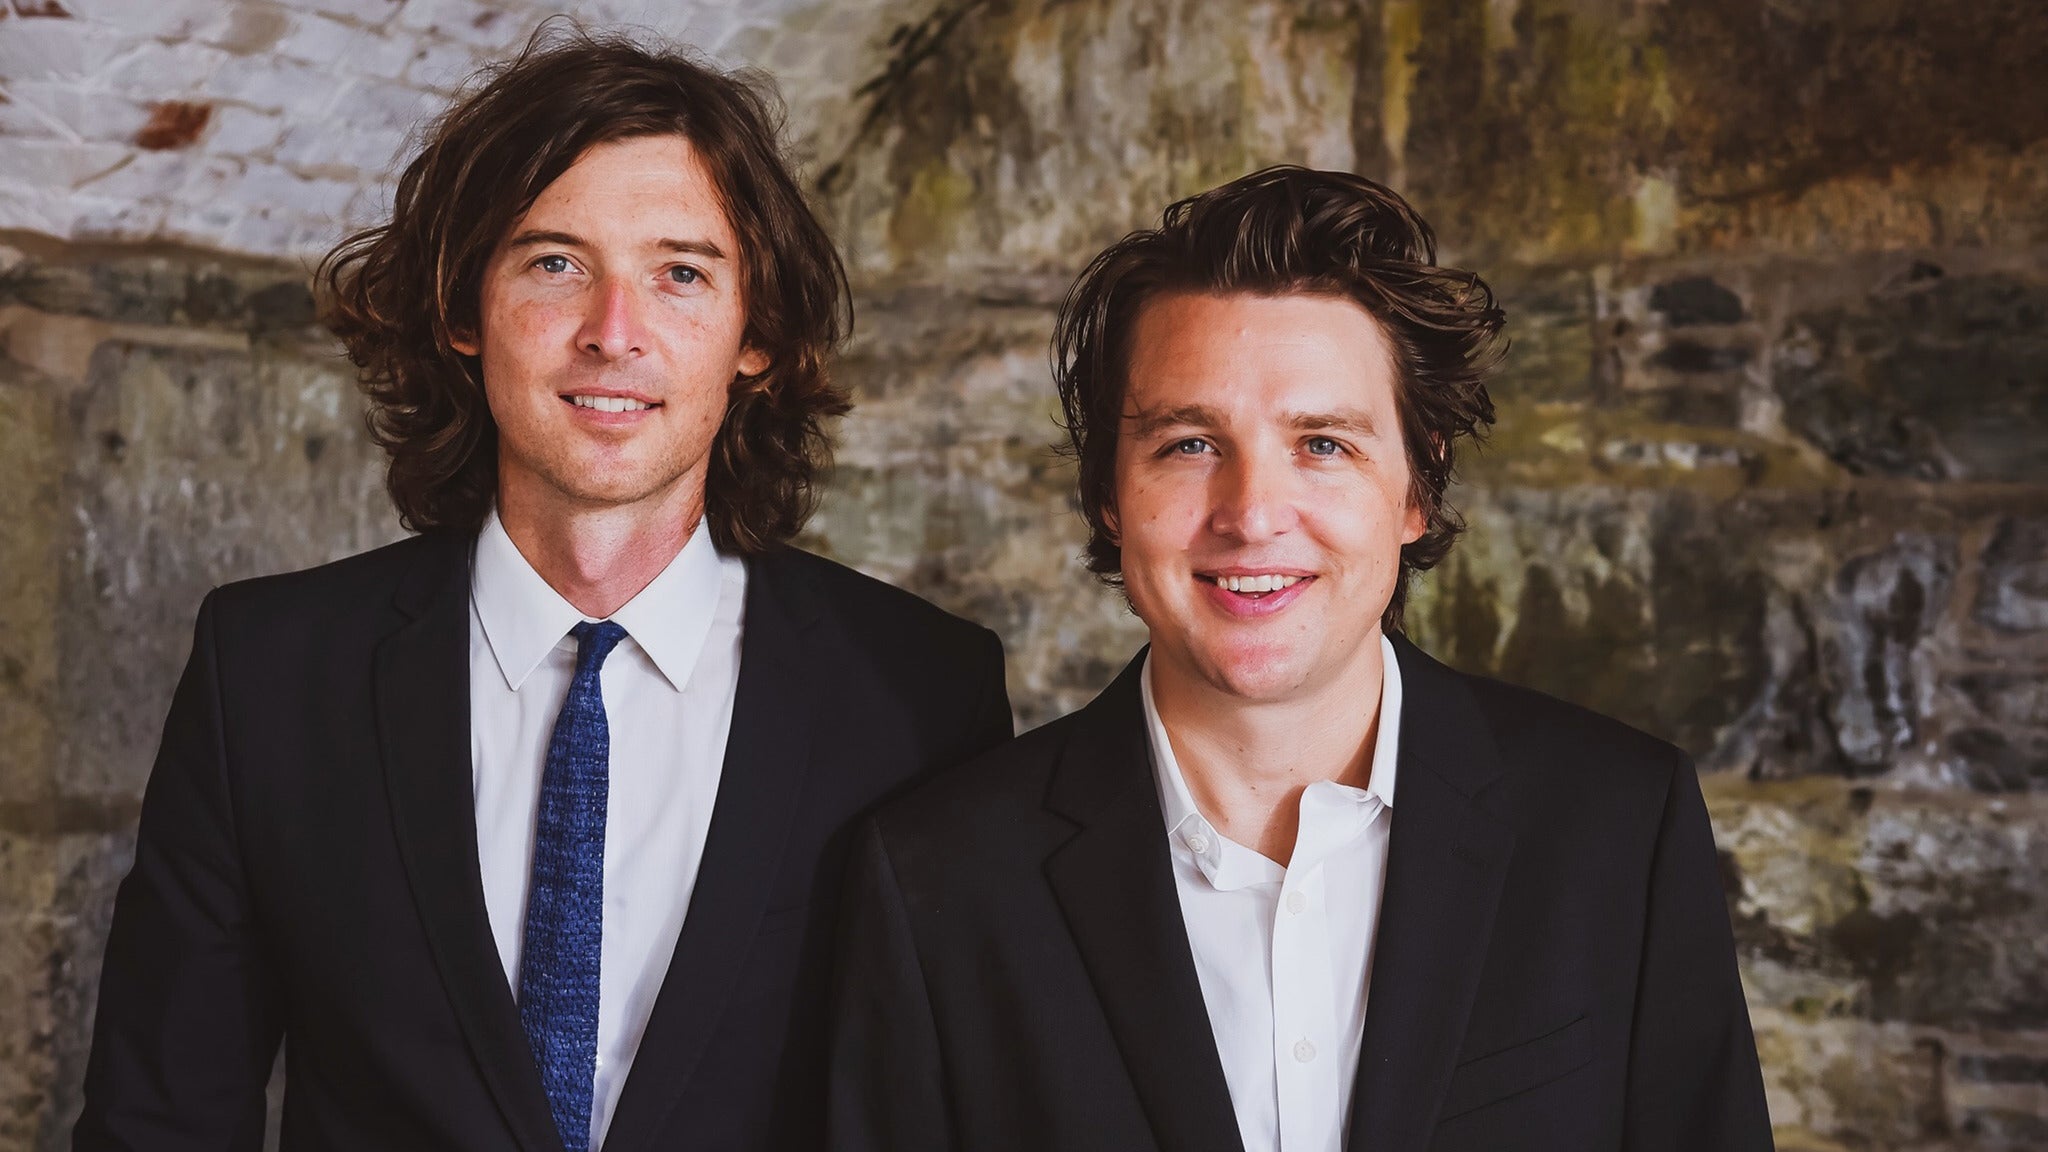 The Milk Carton Kids in Knoxville promo photo for Venue presale offer code